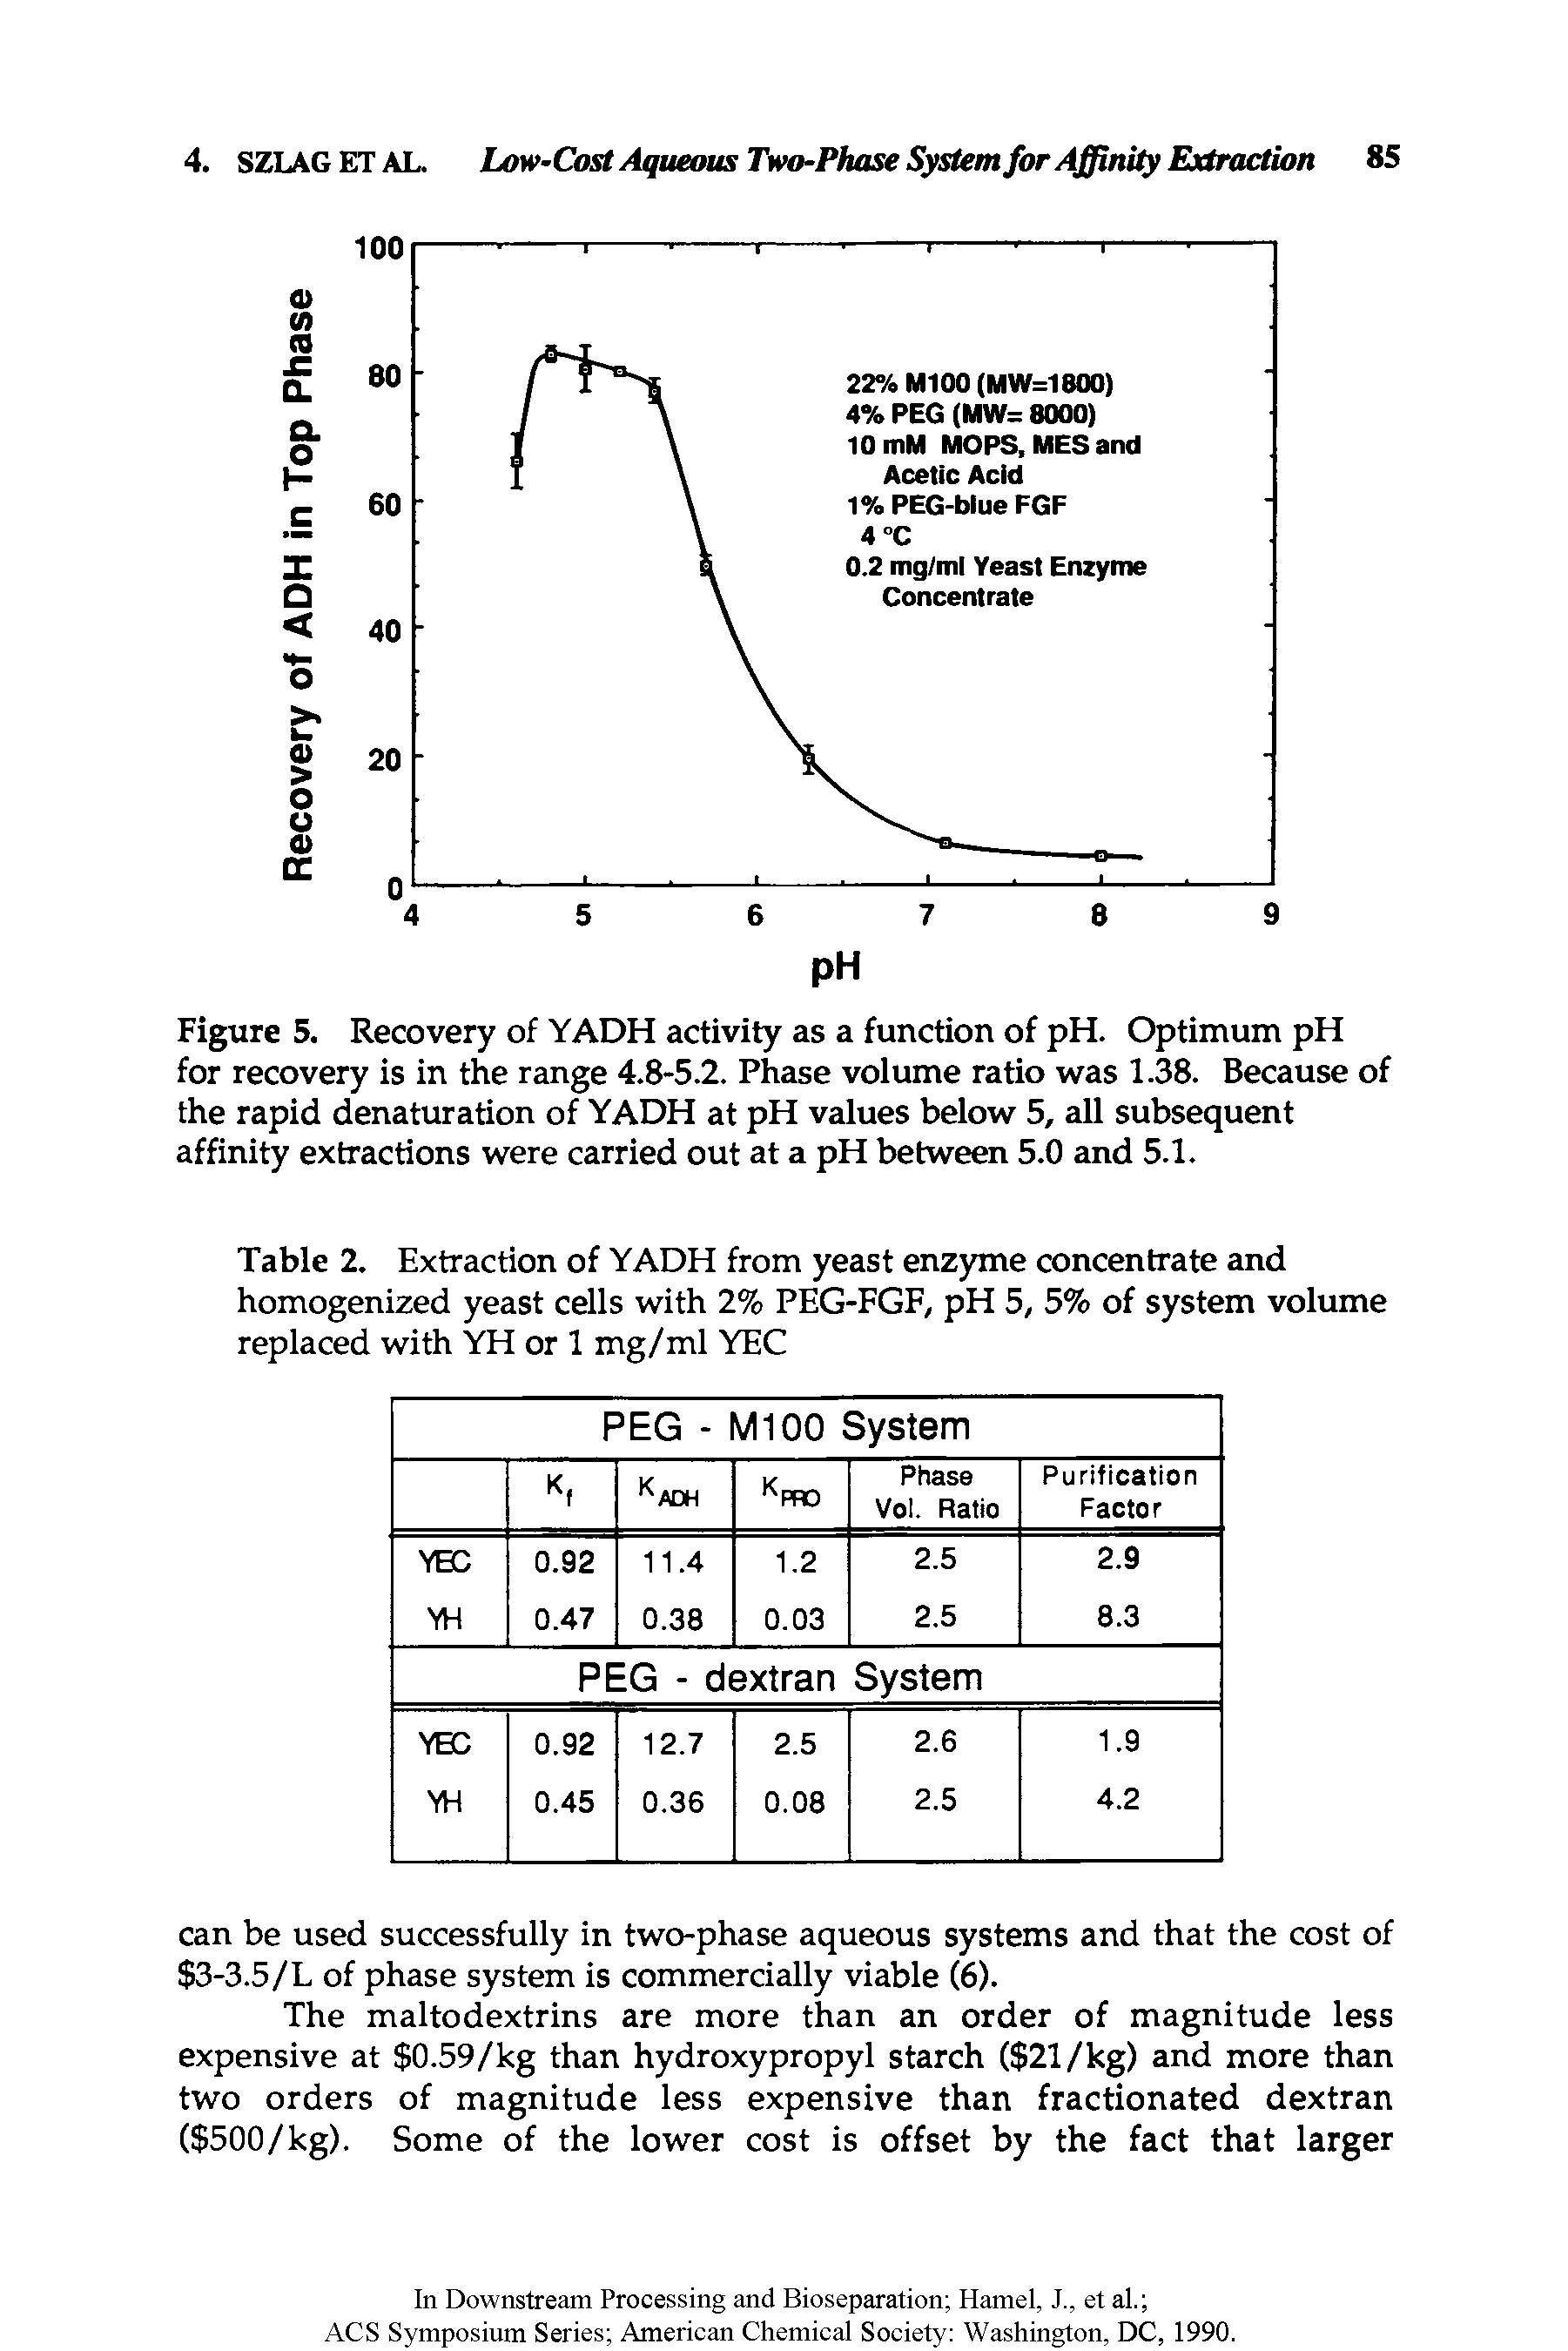 Figure 5. Recovery of YADH activity as a function of pH. Optimum pH for recovery is in the range 4.8-5.2. Phase volume ratio was 1.38. Because of the rapid denaturation of YADH at pH values below 5, all subsequent affinity extractions were carried out at a pH between 5.0 and 5.1.